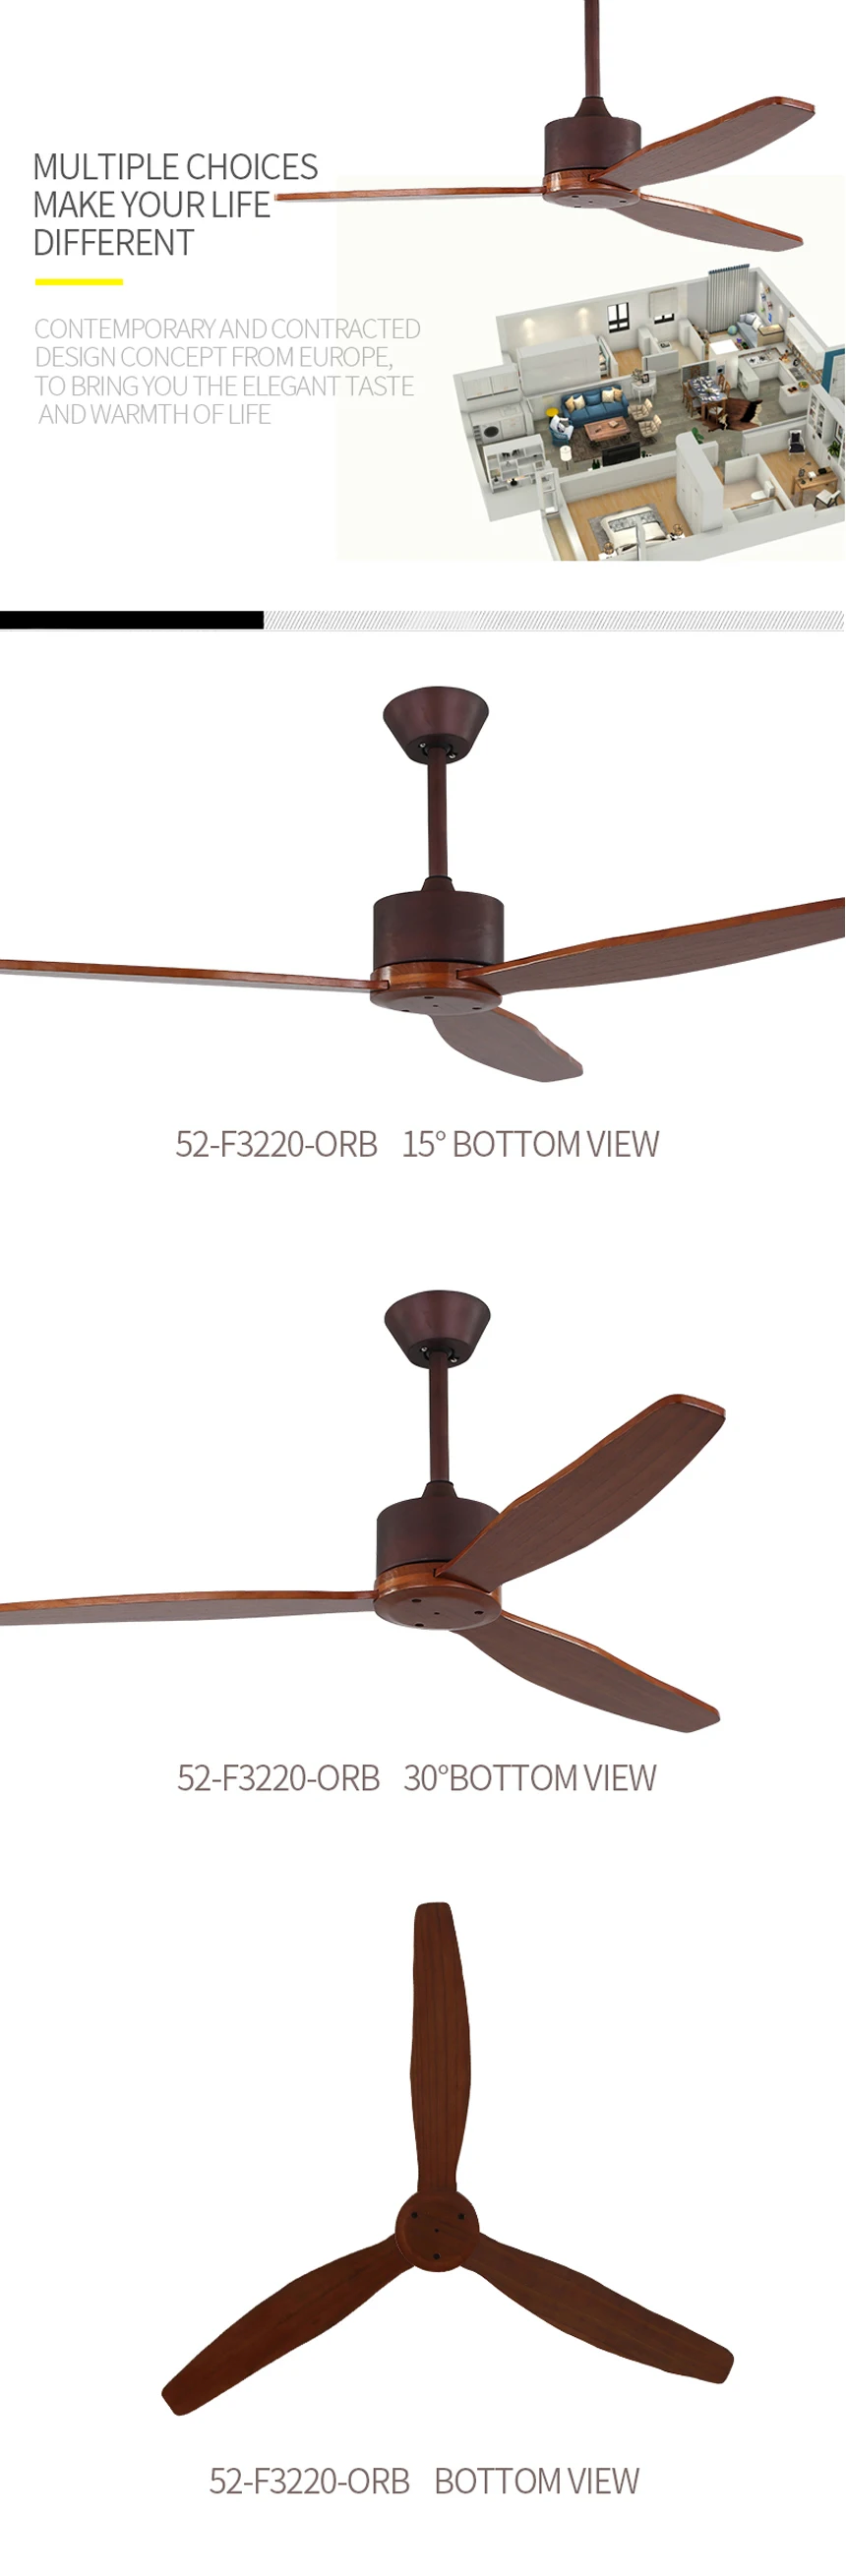 Good quality 52-F3220-ORB decorative ceiling light fan with light